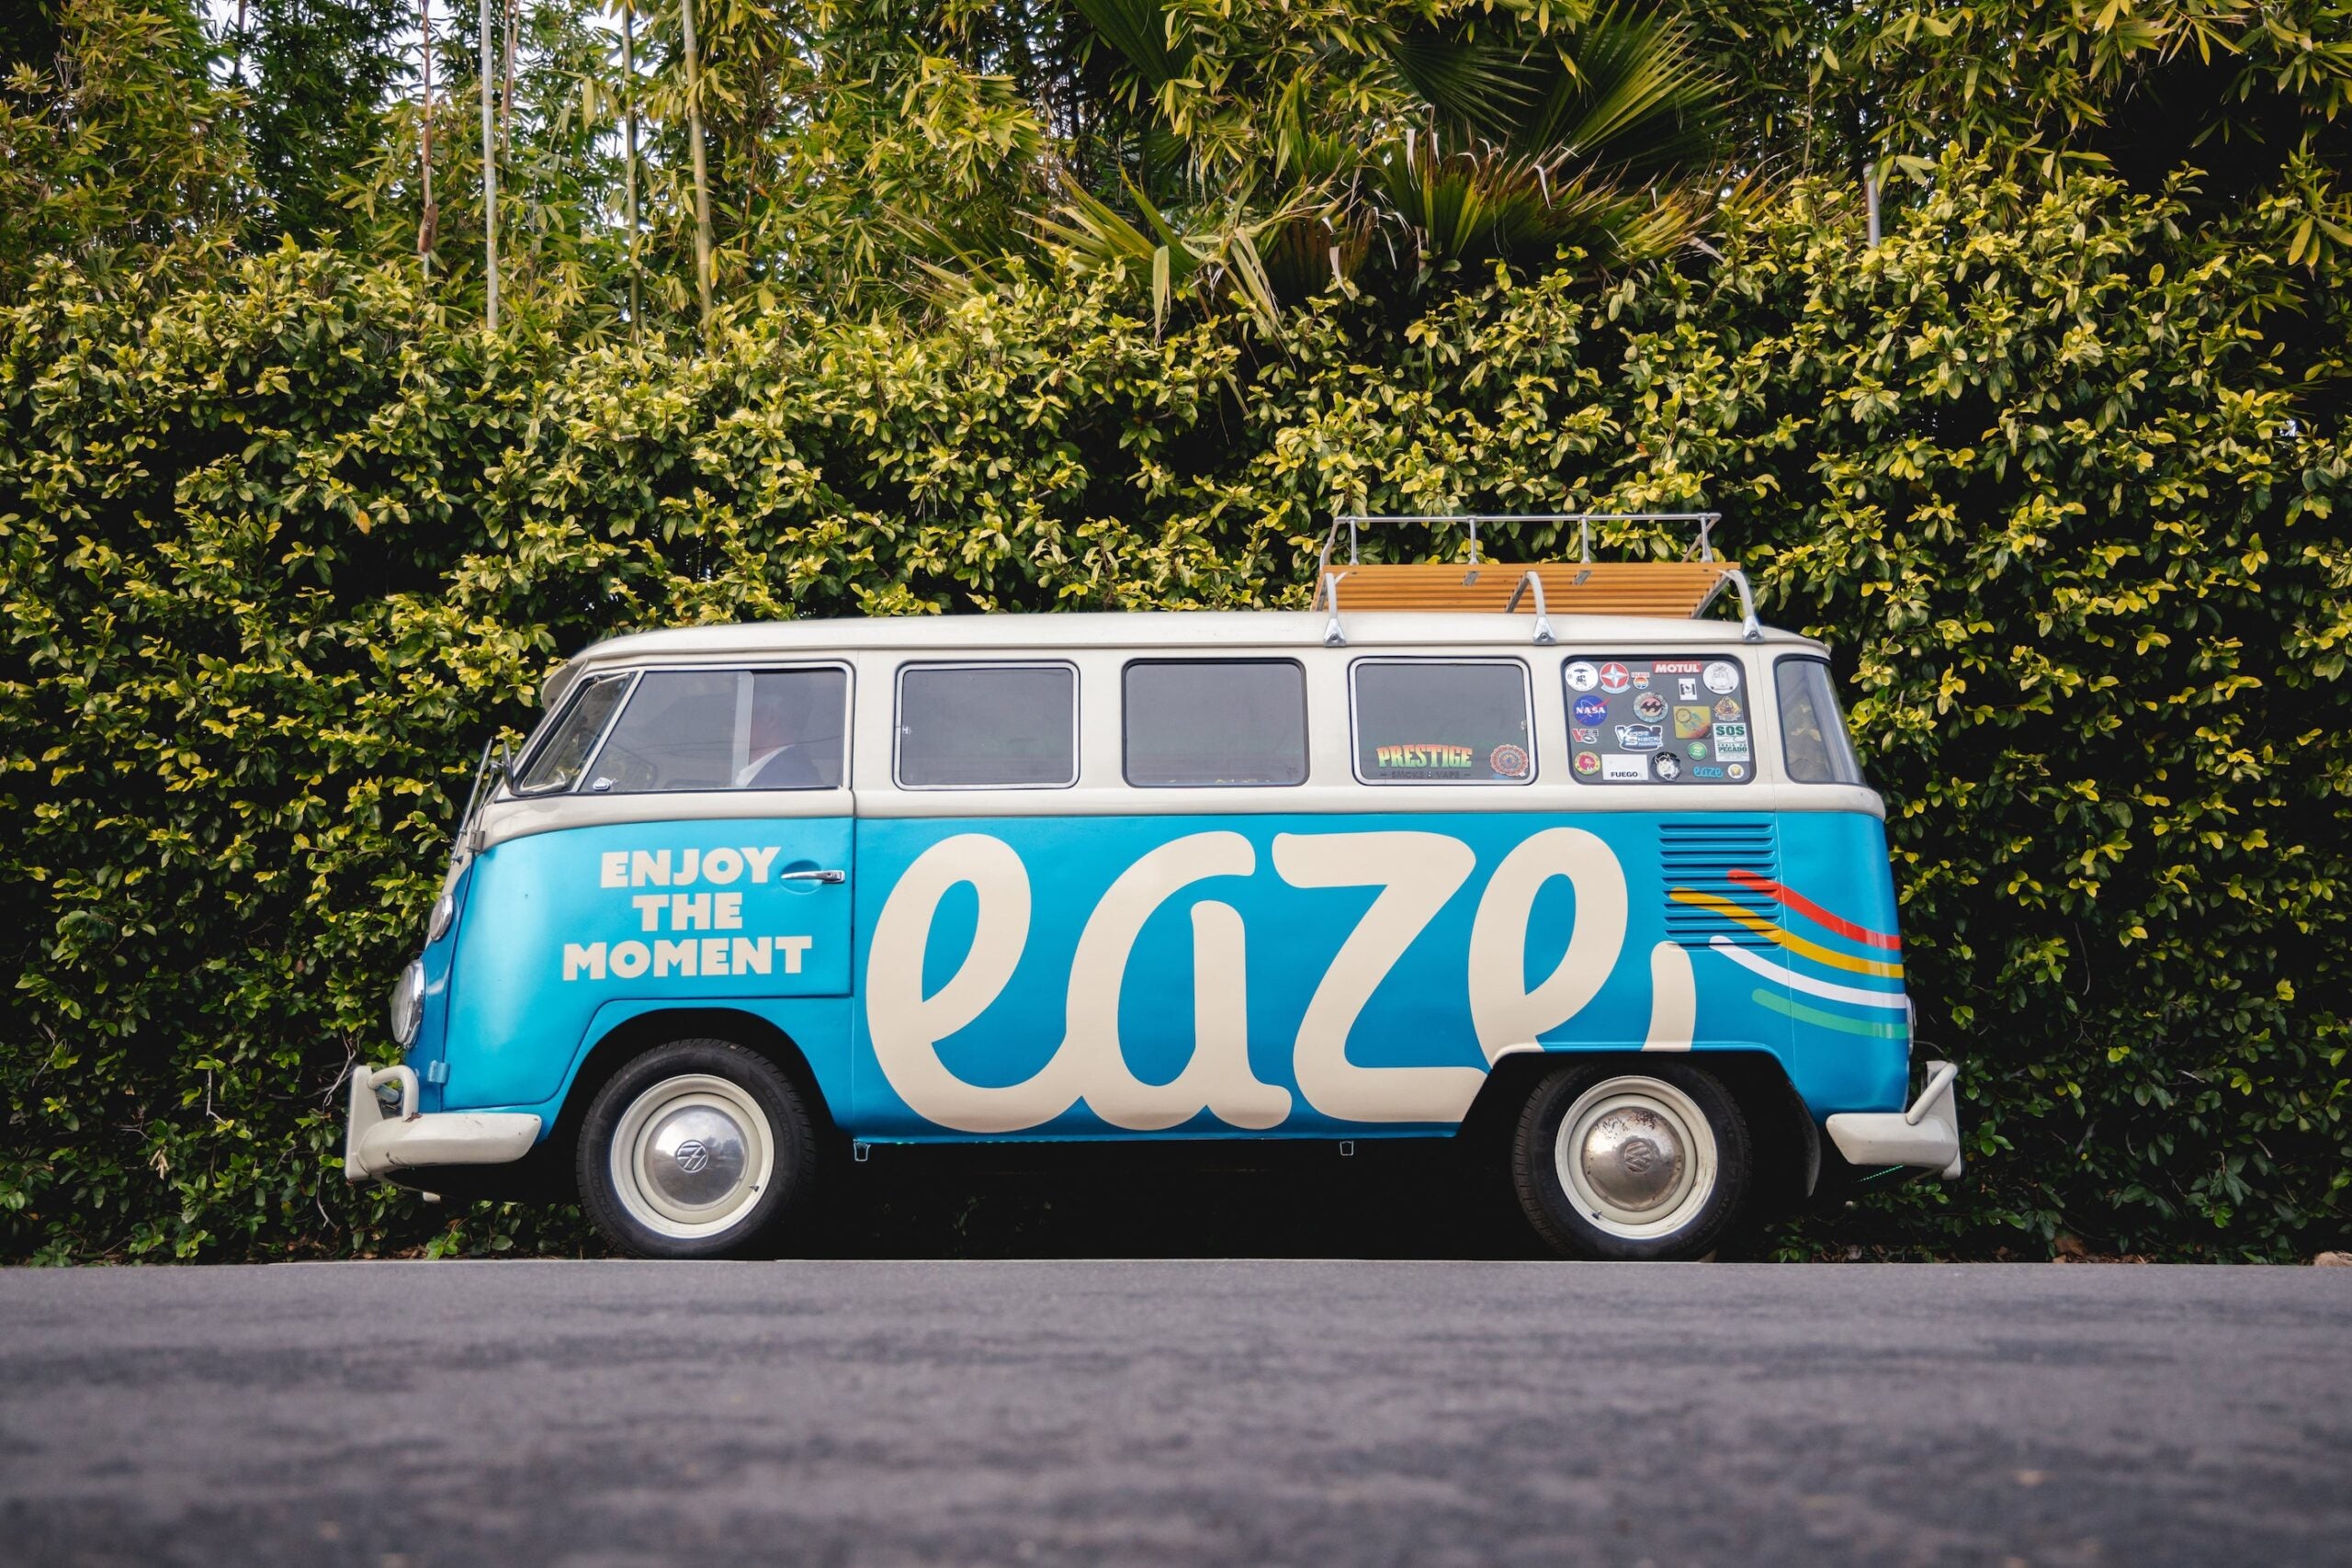 Eaze To Acquire Green Dragon, Making Them The Nation’s Largest MSO Delivery Operation